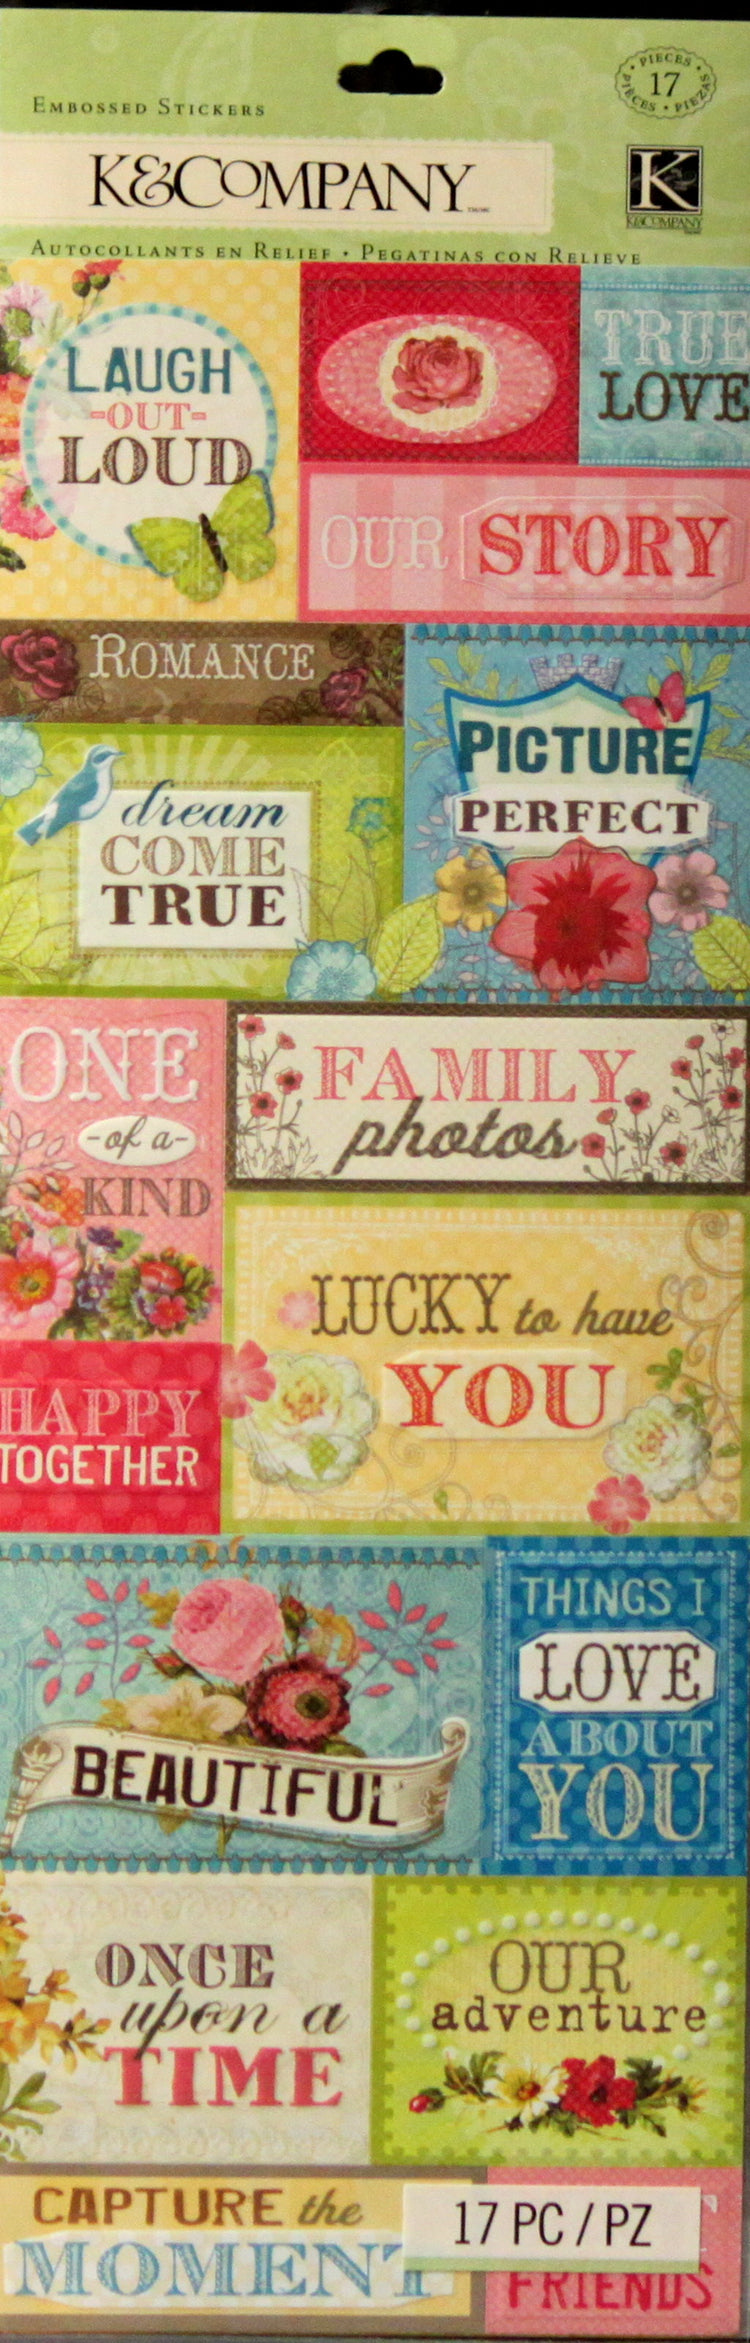 K & Company Serendipity Embossed Stickers